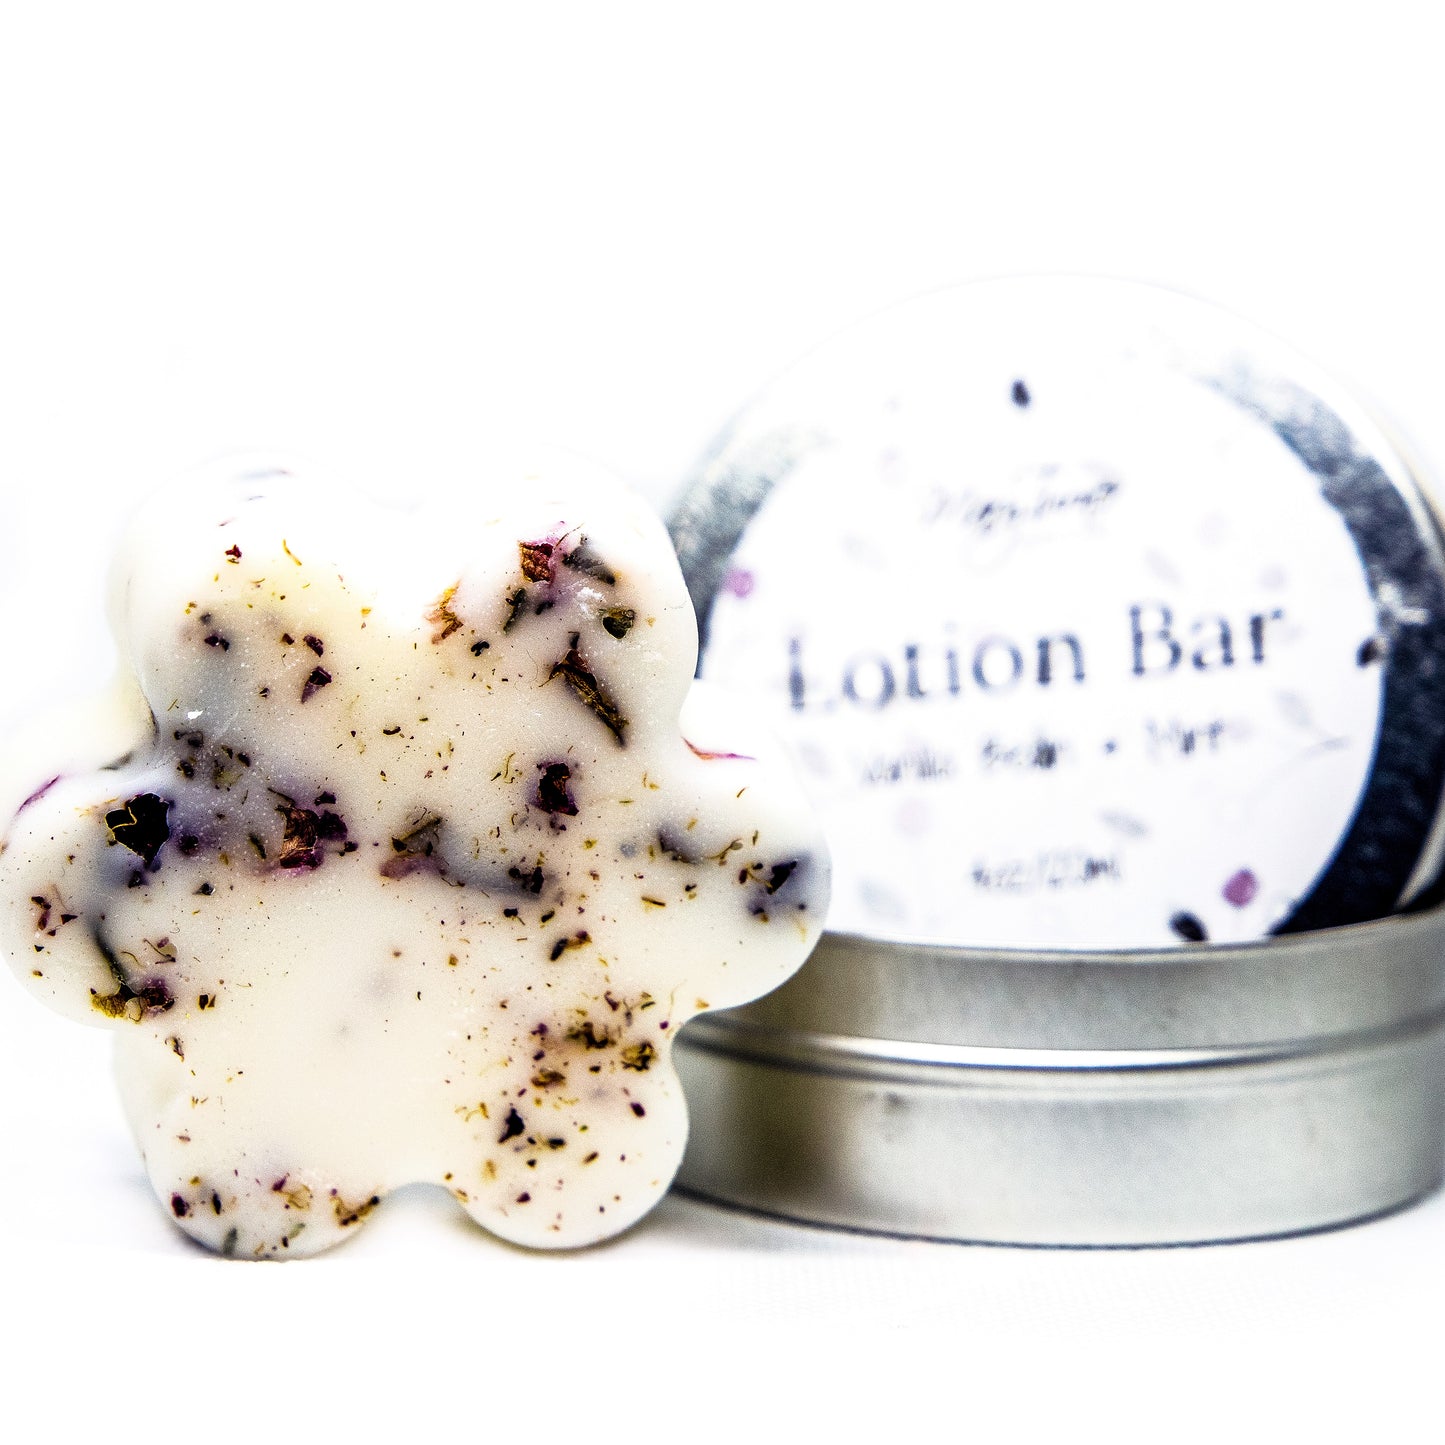 Lotion Bars - Mary Turner Day Spa & Boutique